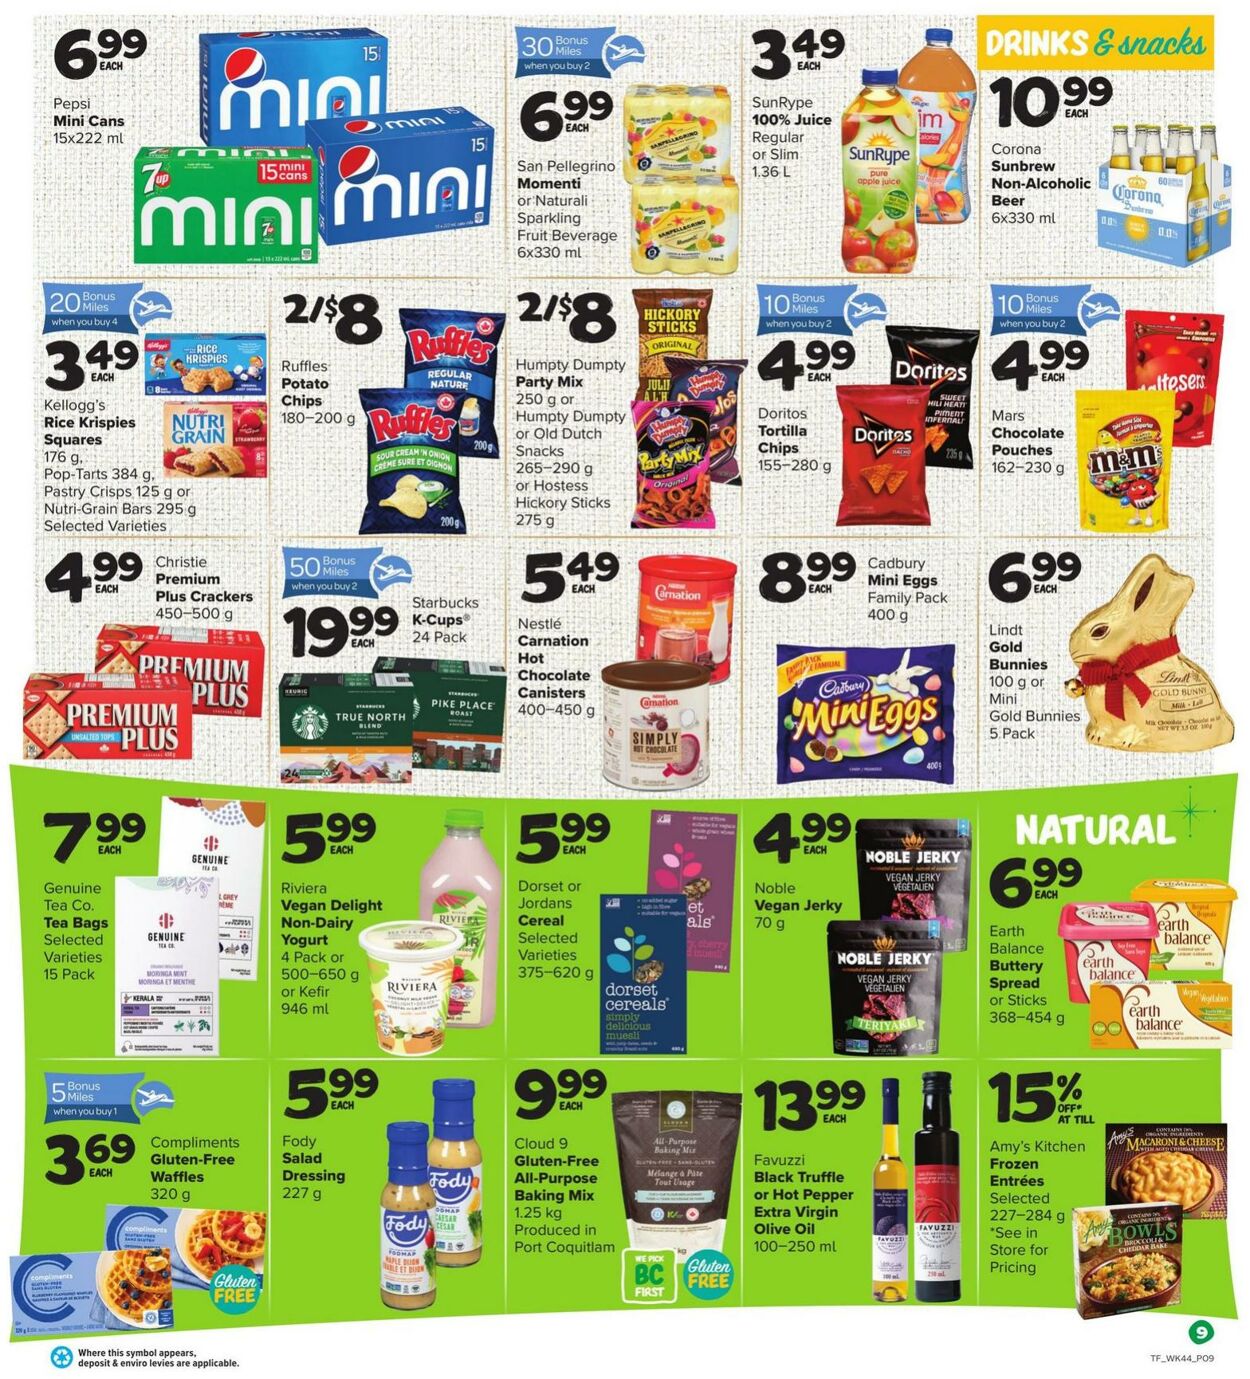 Circulaire Thrifty Foods 02.03.2023 - 08.03.2023